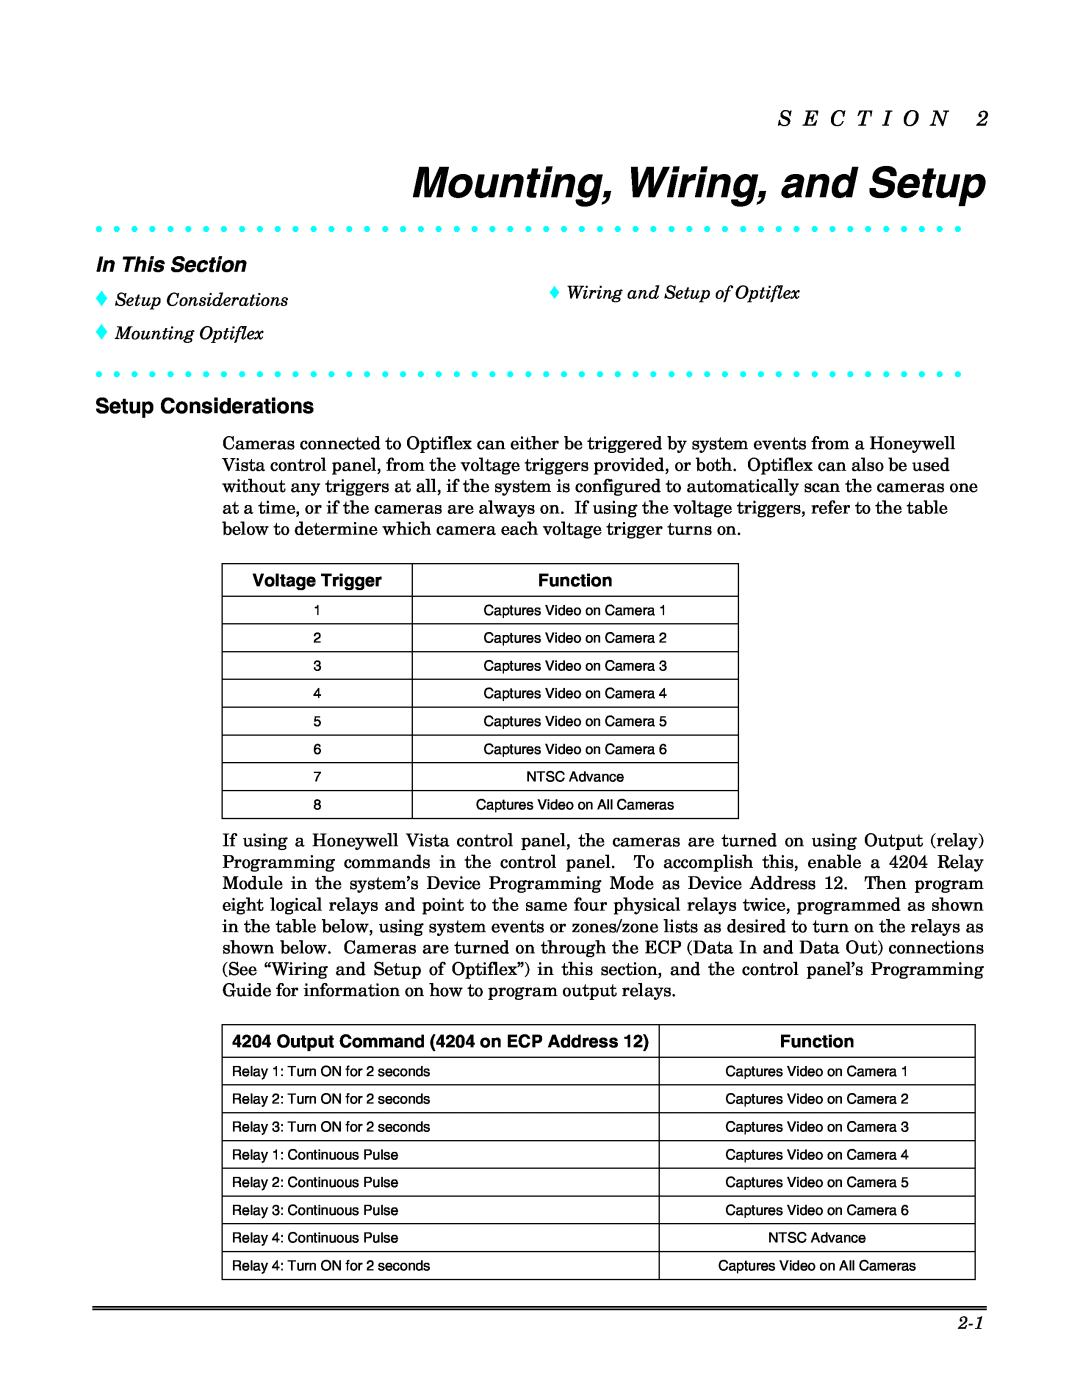 Honeywell Mounting, Wiring, and Setup, Setup Considerations, S E C T I O N, In This Section, Mounting Optiflex 